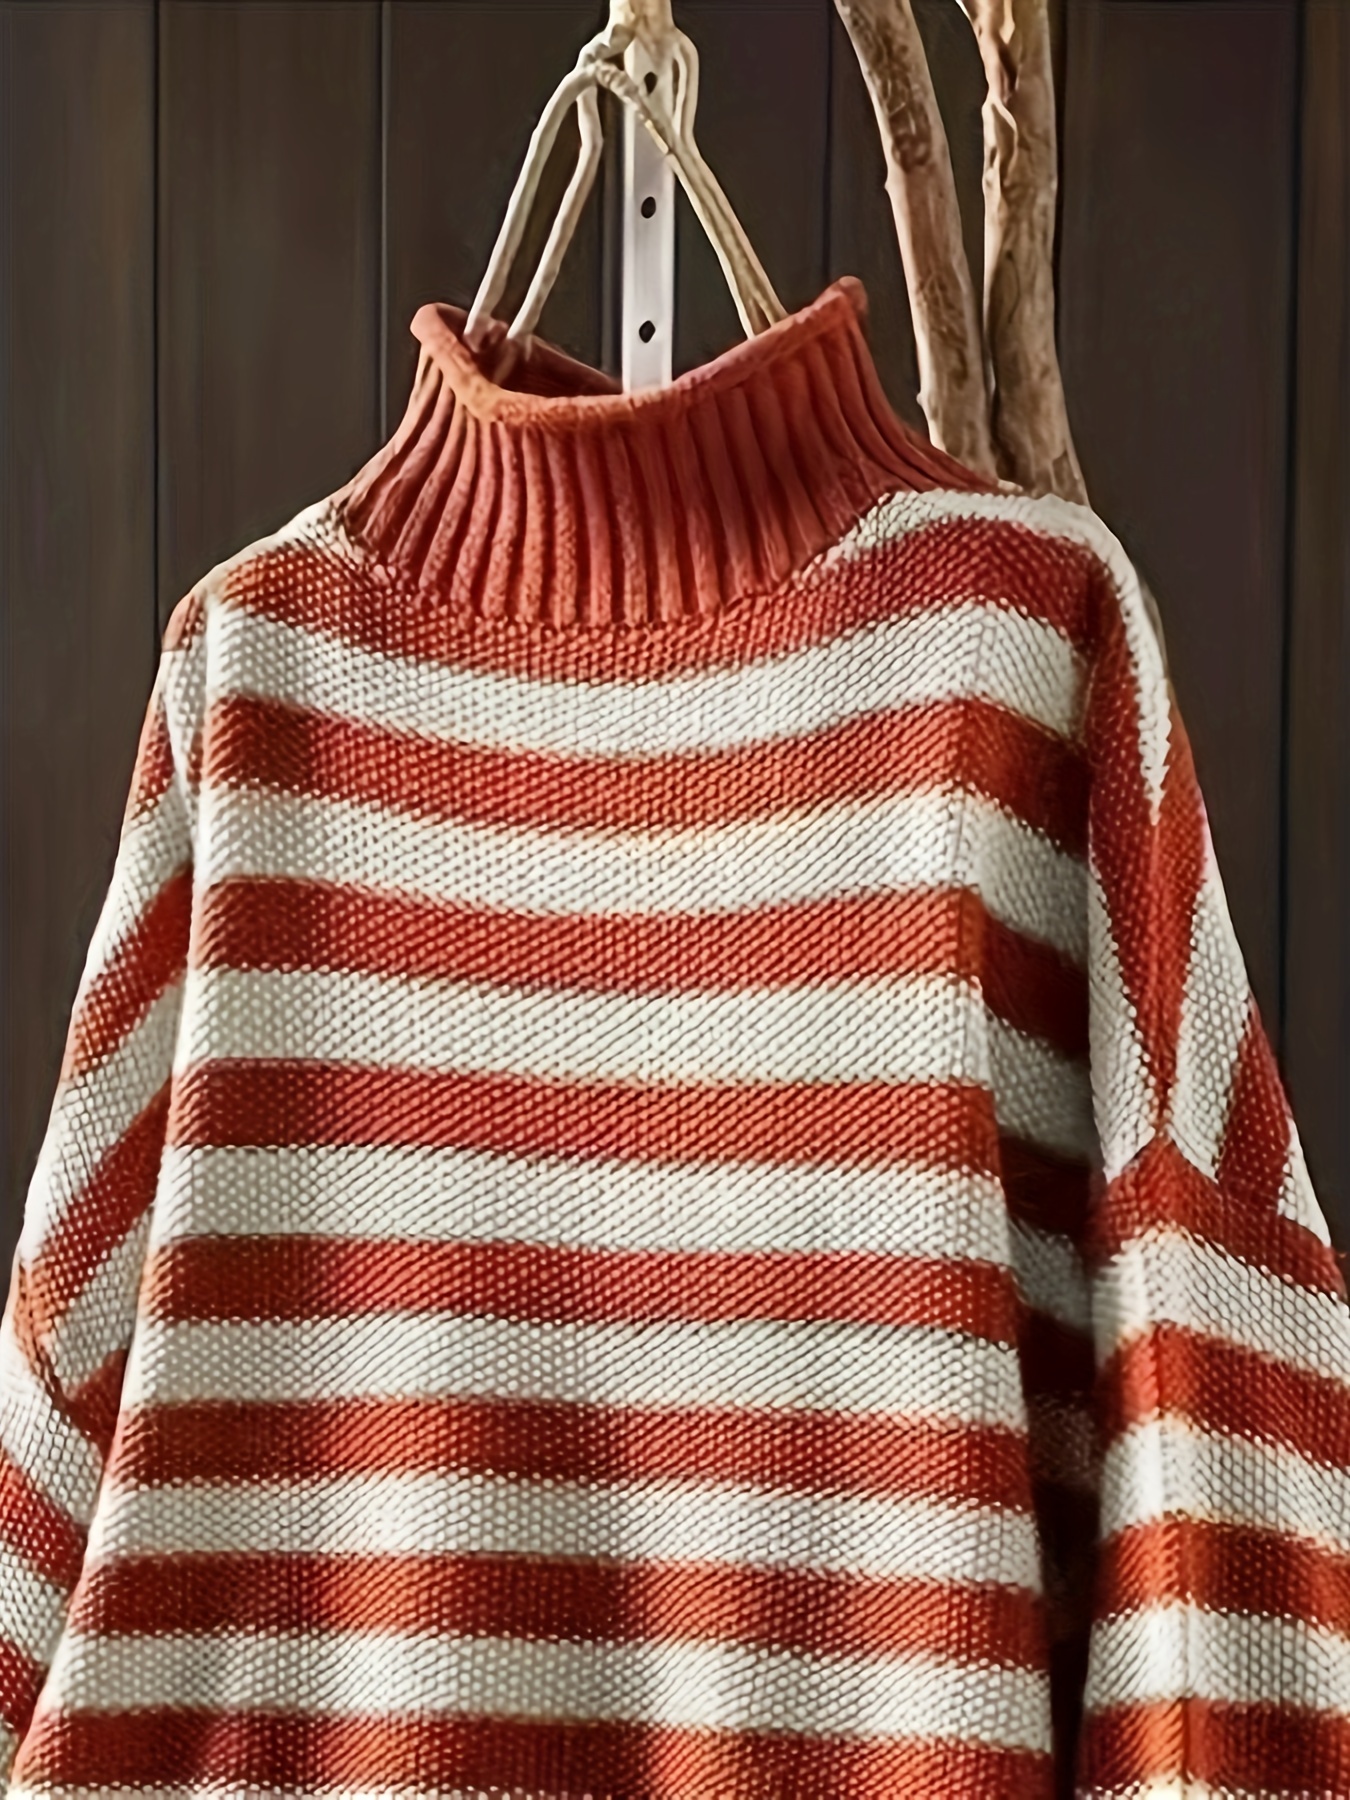 Striped Mock Neck Knit Sweater, Vintage Long Sleeve Pullover Sweater,  Women's Clothing